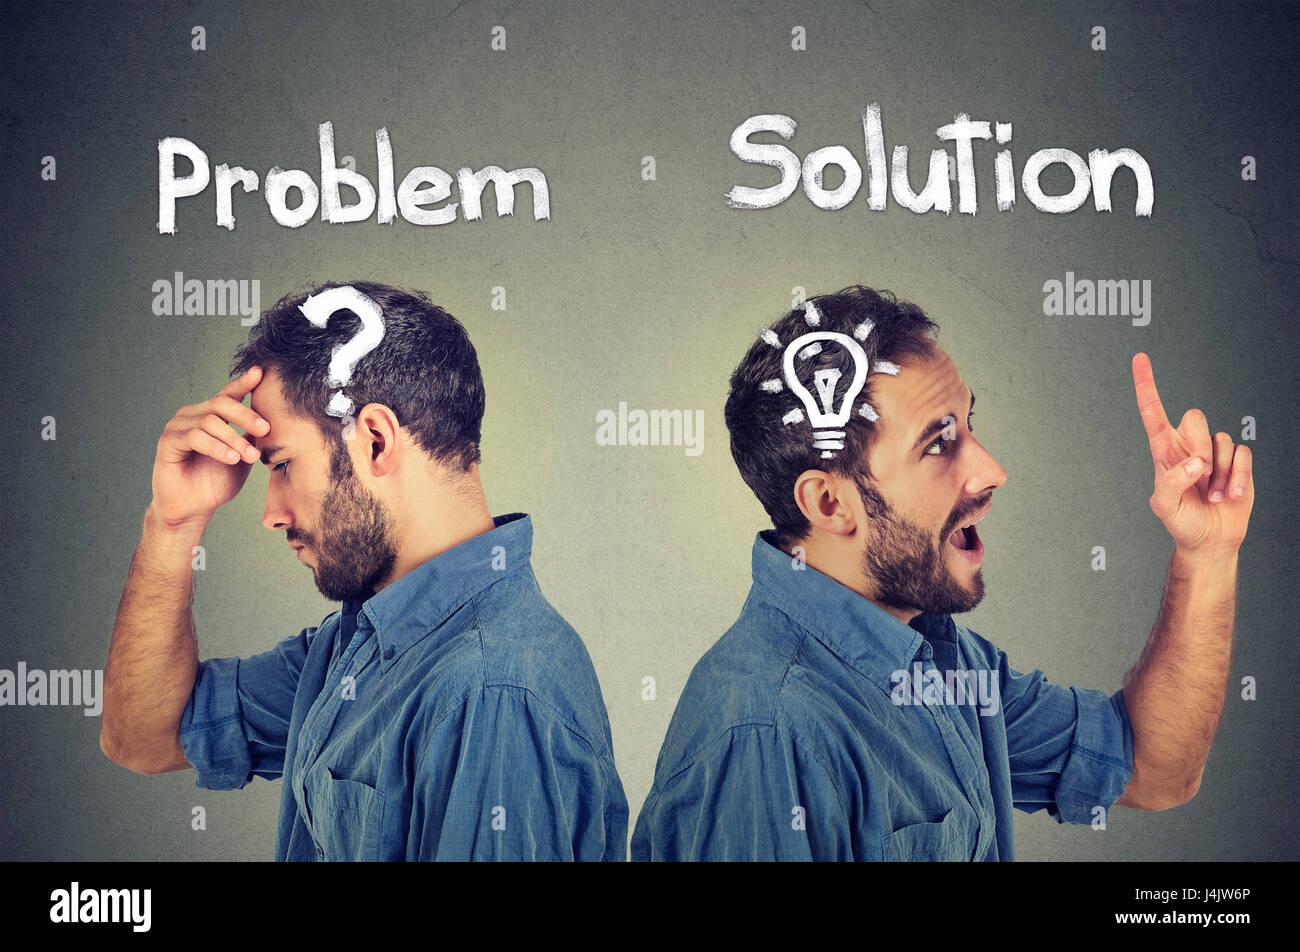 Thoughtful man with question mark has a solution bright idea Stock Photo